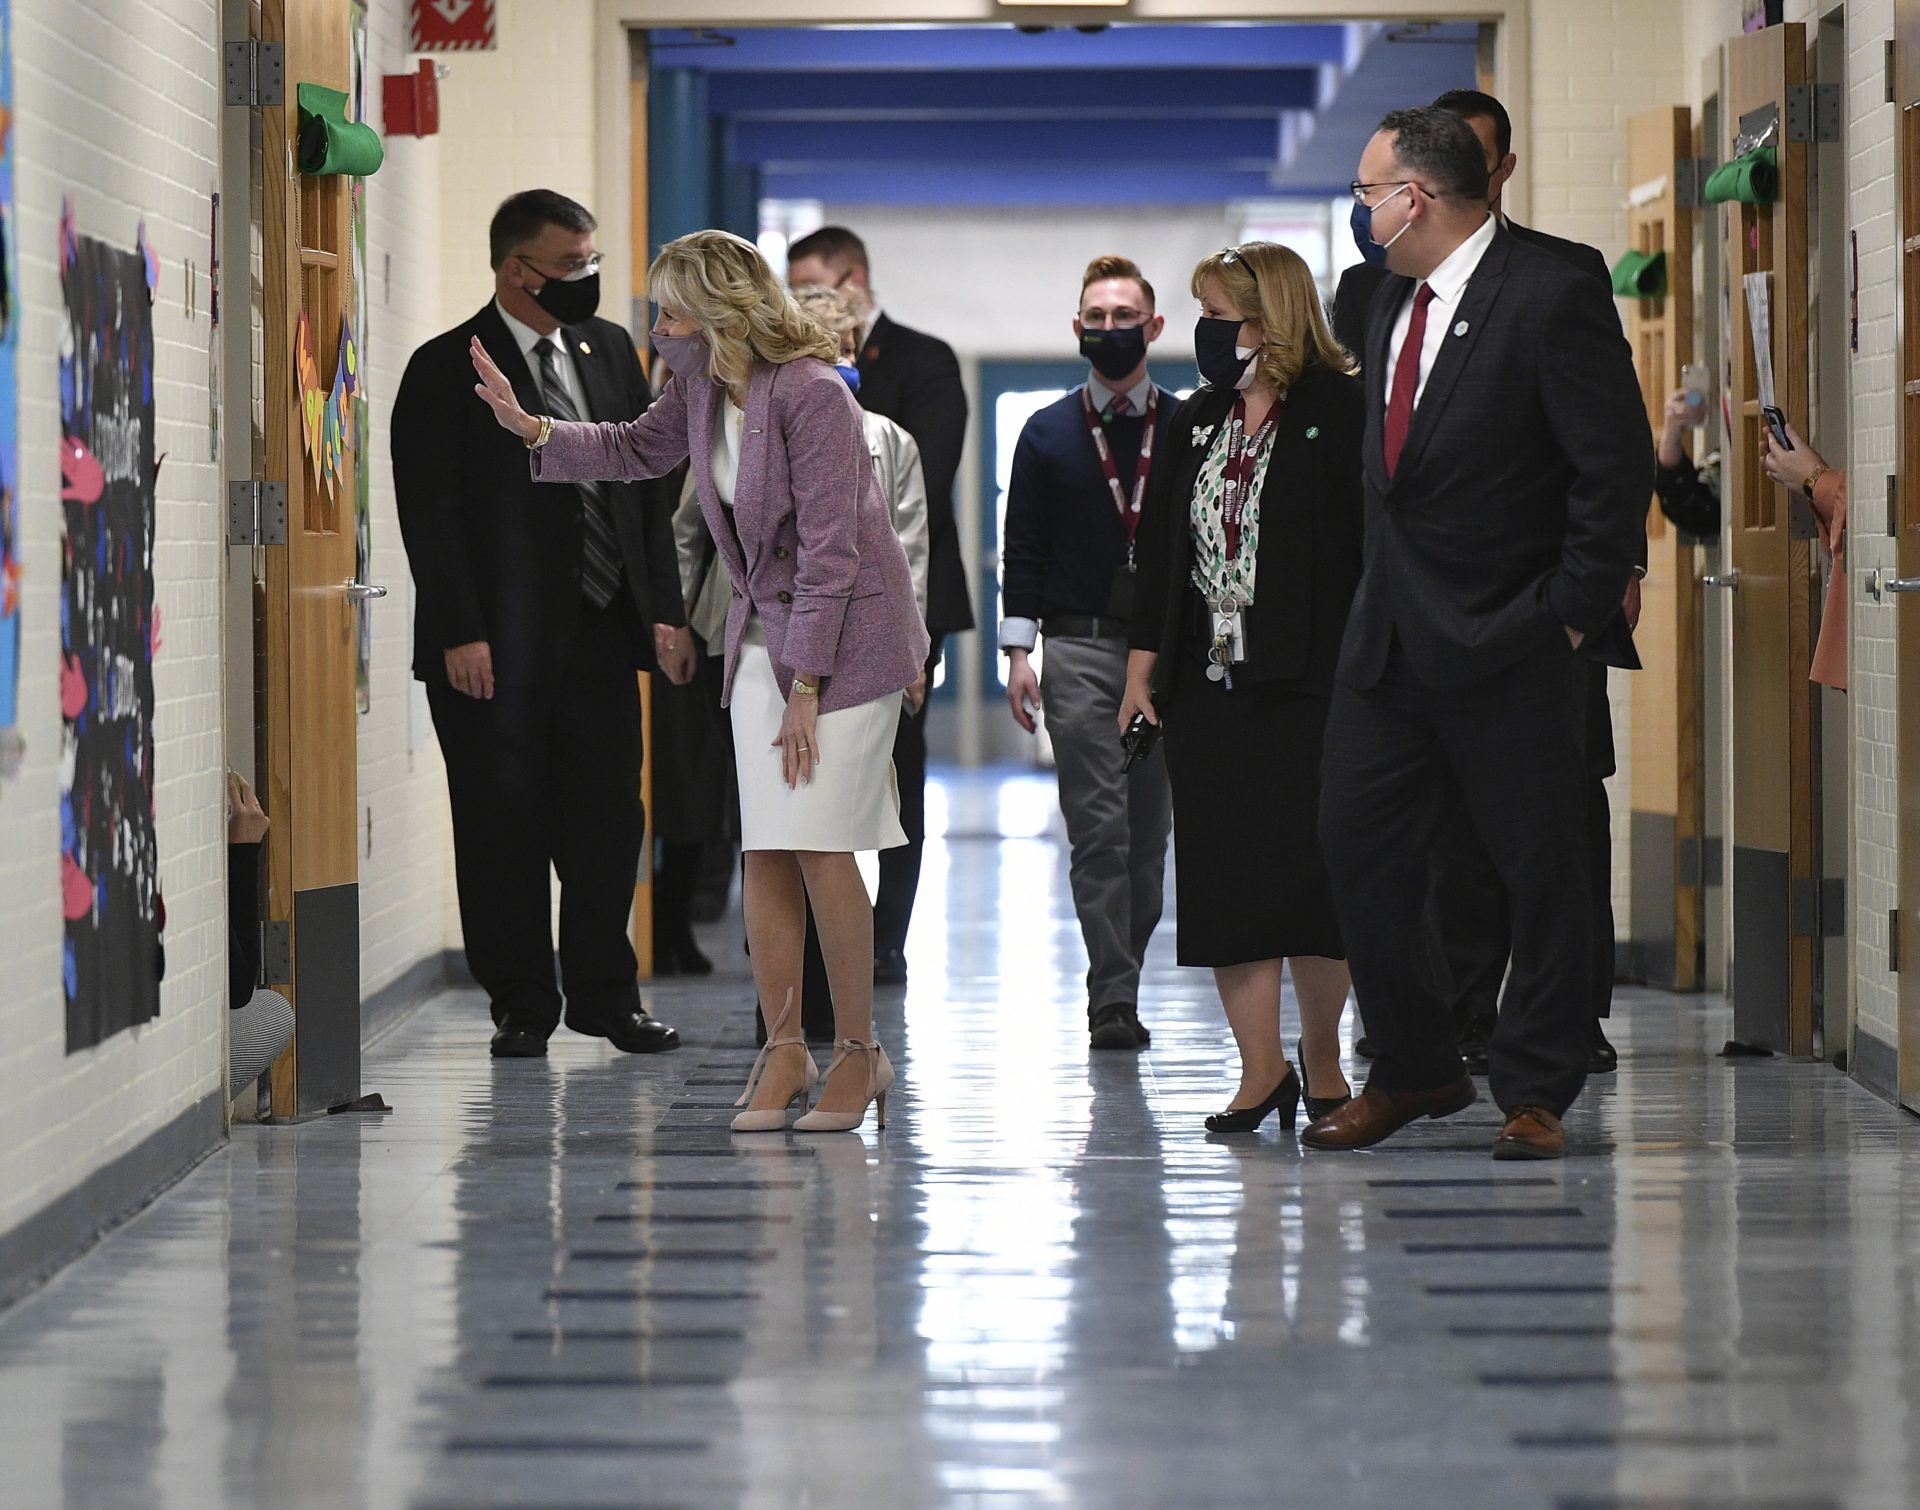 In this March 3, 2021, file photo waves to students in a classroom as she tours Benjamin Franklin Elementary School with Education Secretary Miguel Cardona, right, in Meriden, Ct.